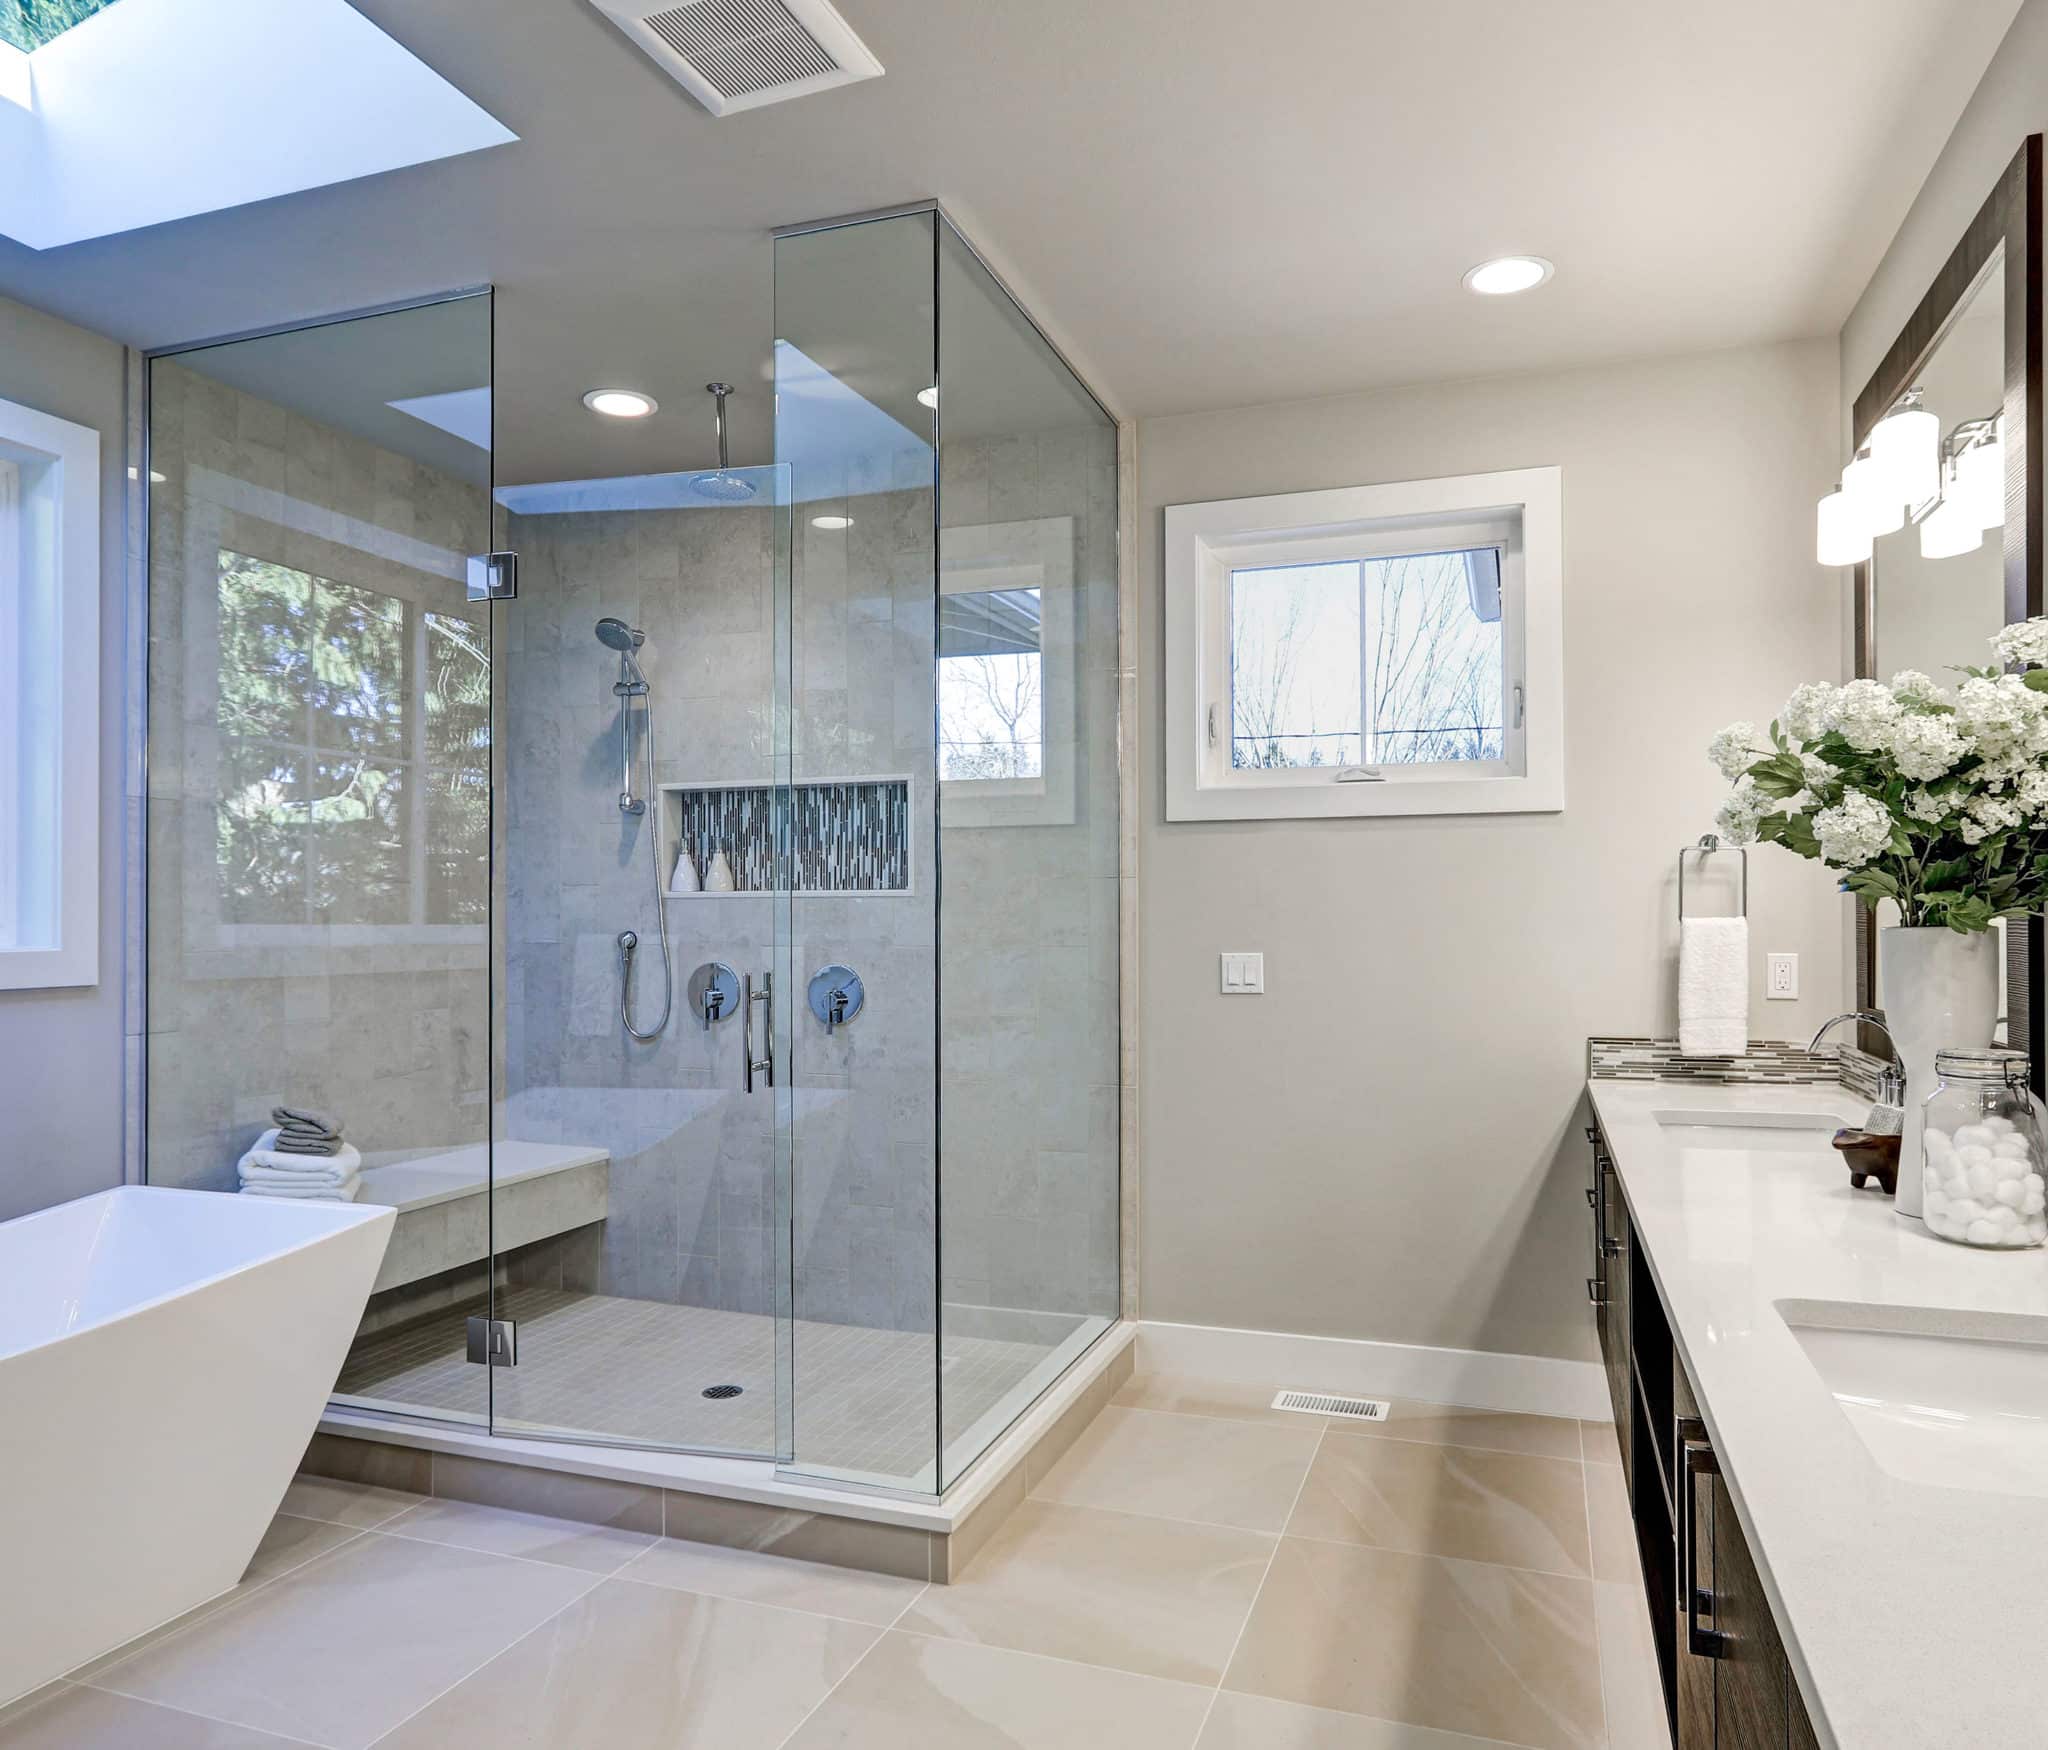 Bathroom Remodeling Contractors Remodel Companies Usa Cabinet Store